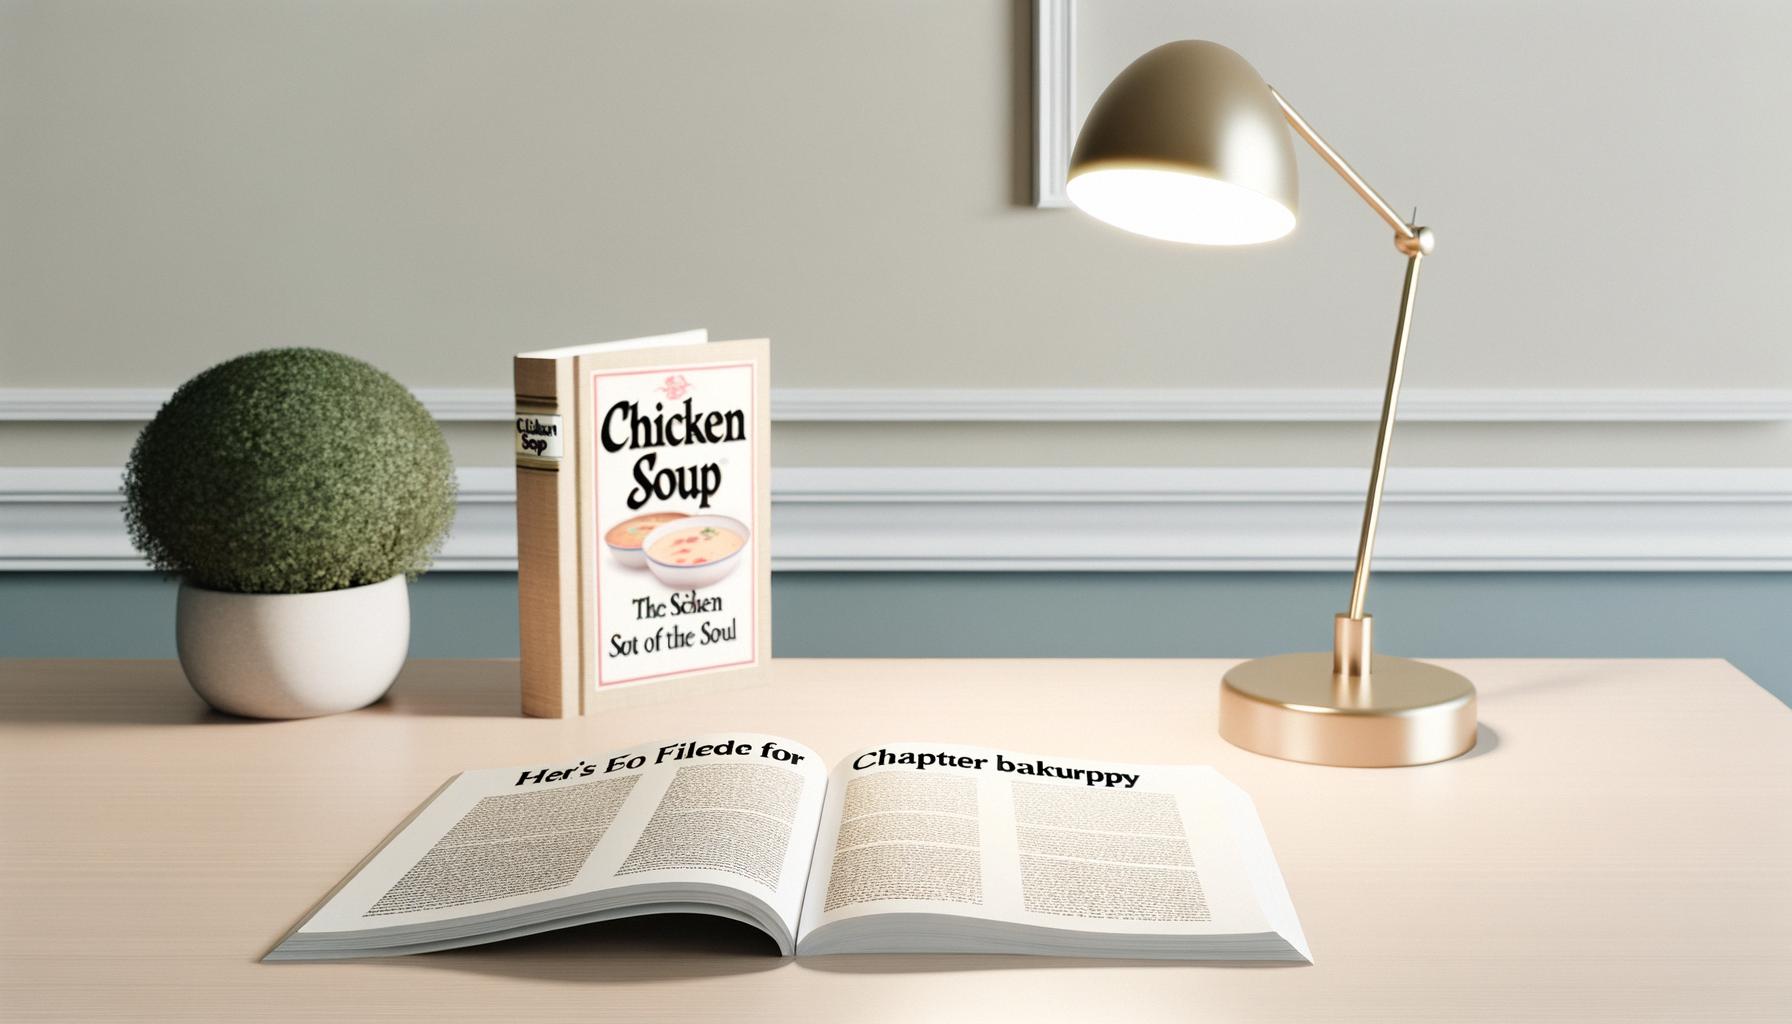 Chicken Soup for the Soul Entertainment filed for Chapter 11 due to unsustainable debt.